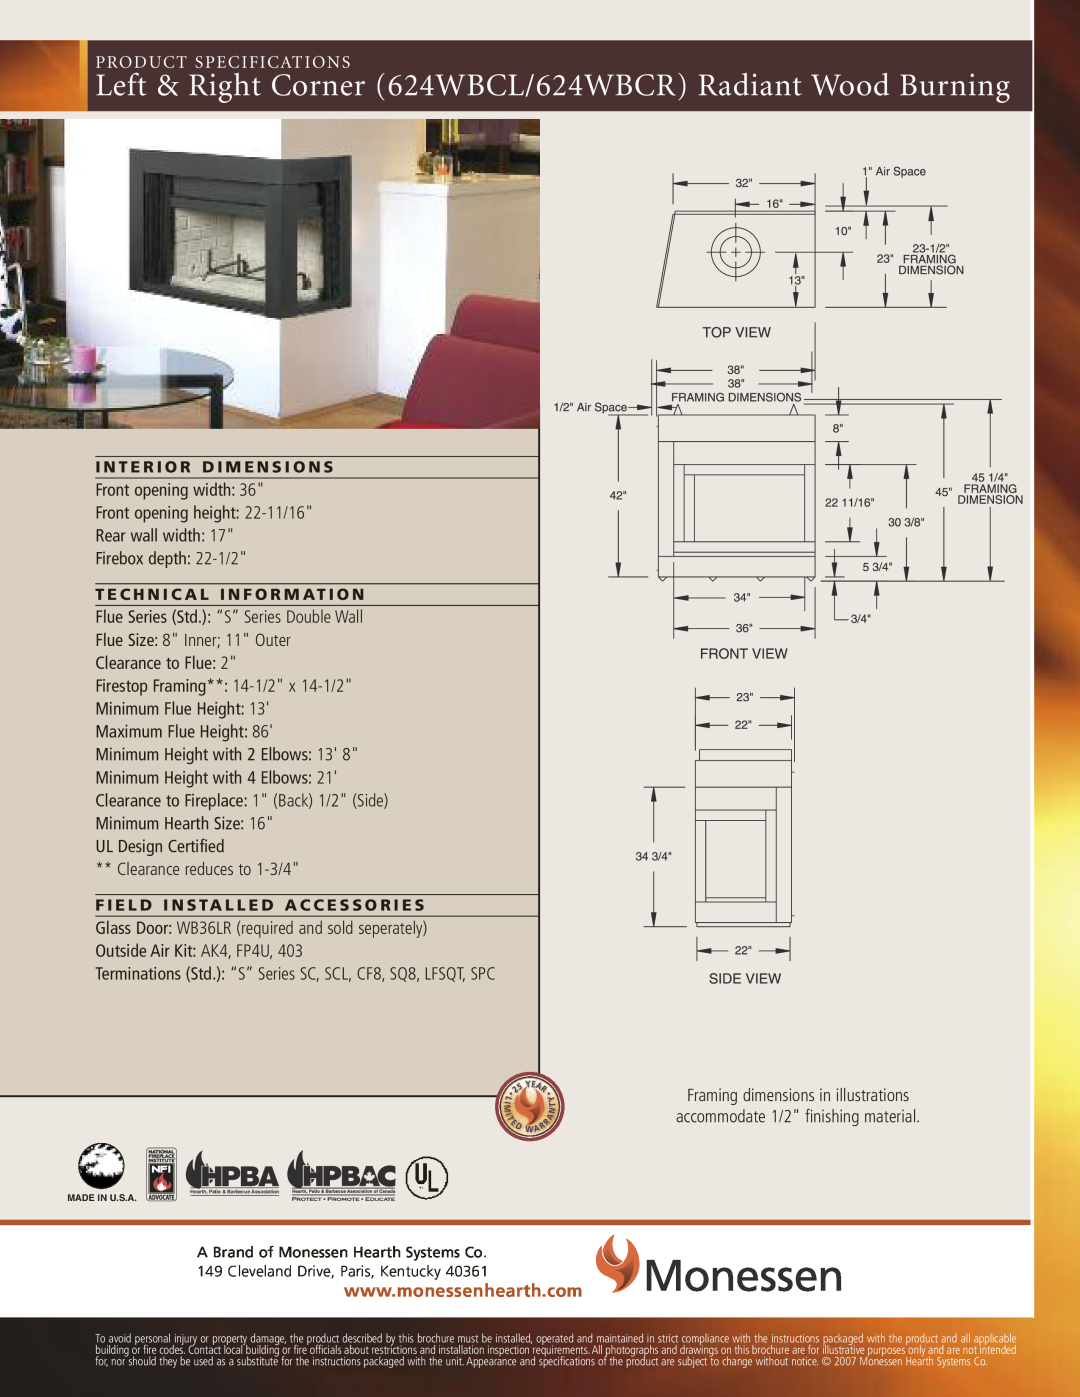 Monessen Hearth 624WBCR, 624WBCL brochure Hpba, Product Specifications, Flue Series Std. “S” Series Double Wall 